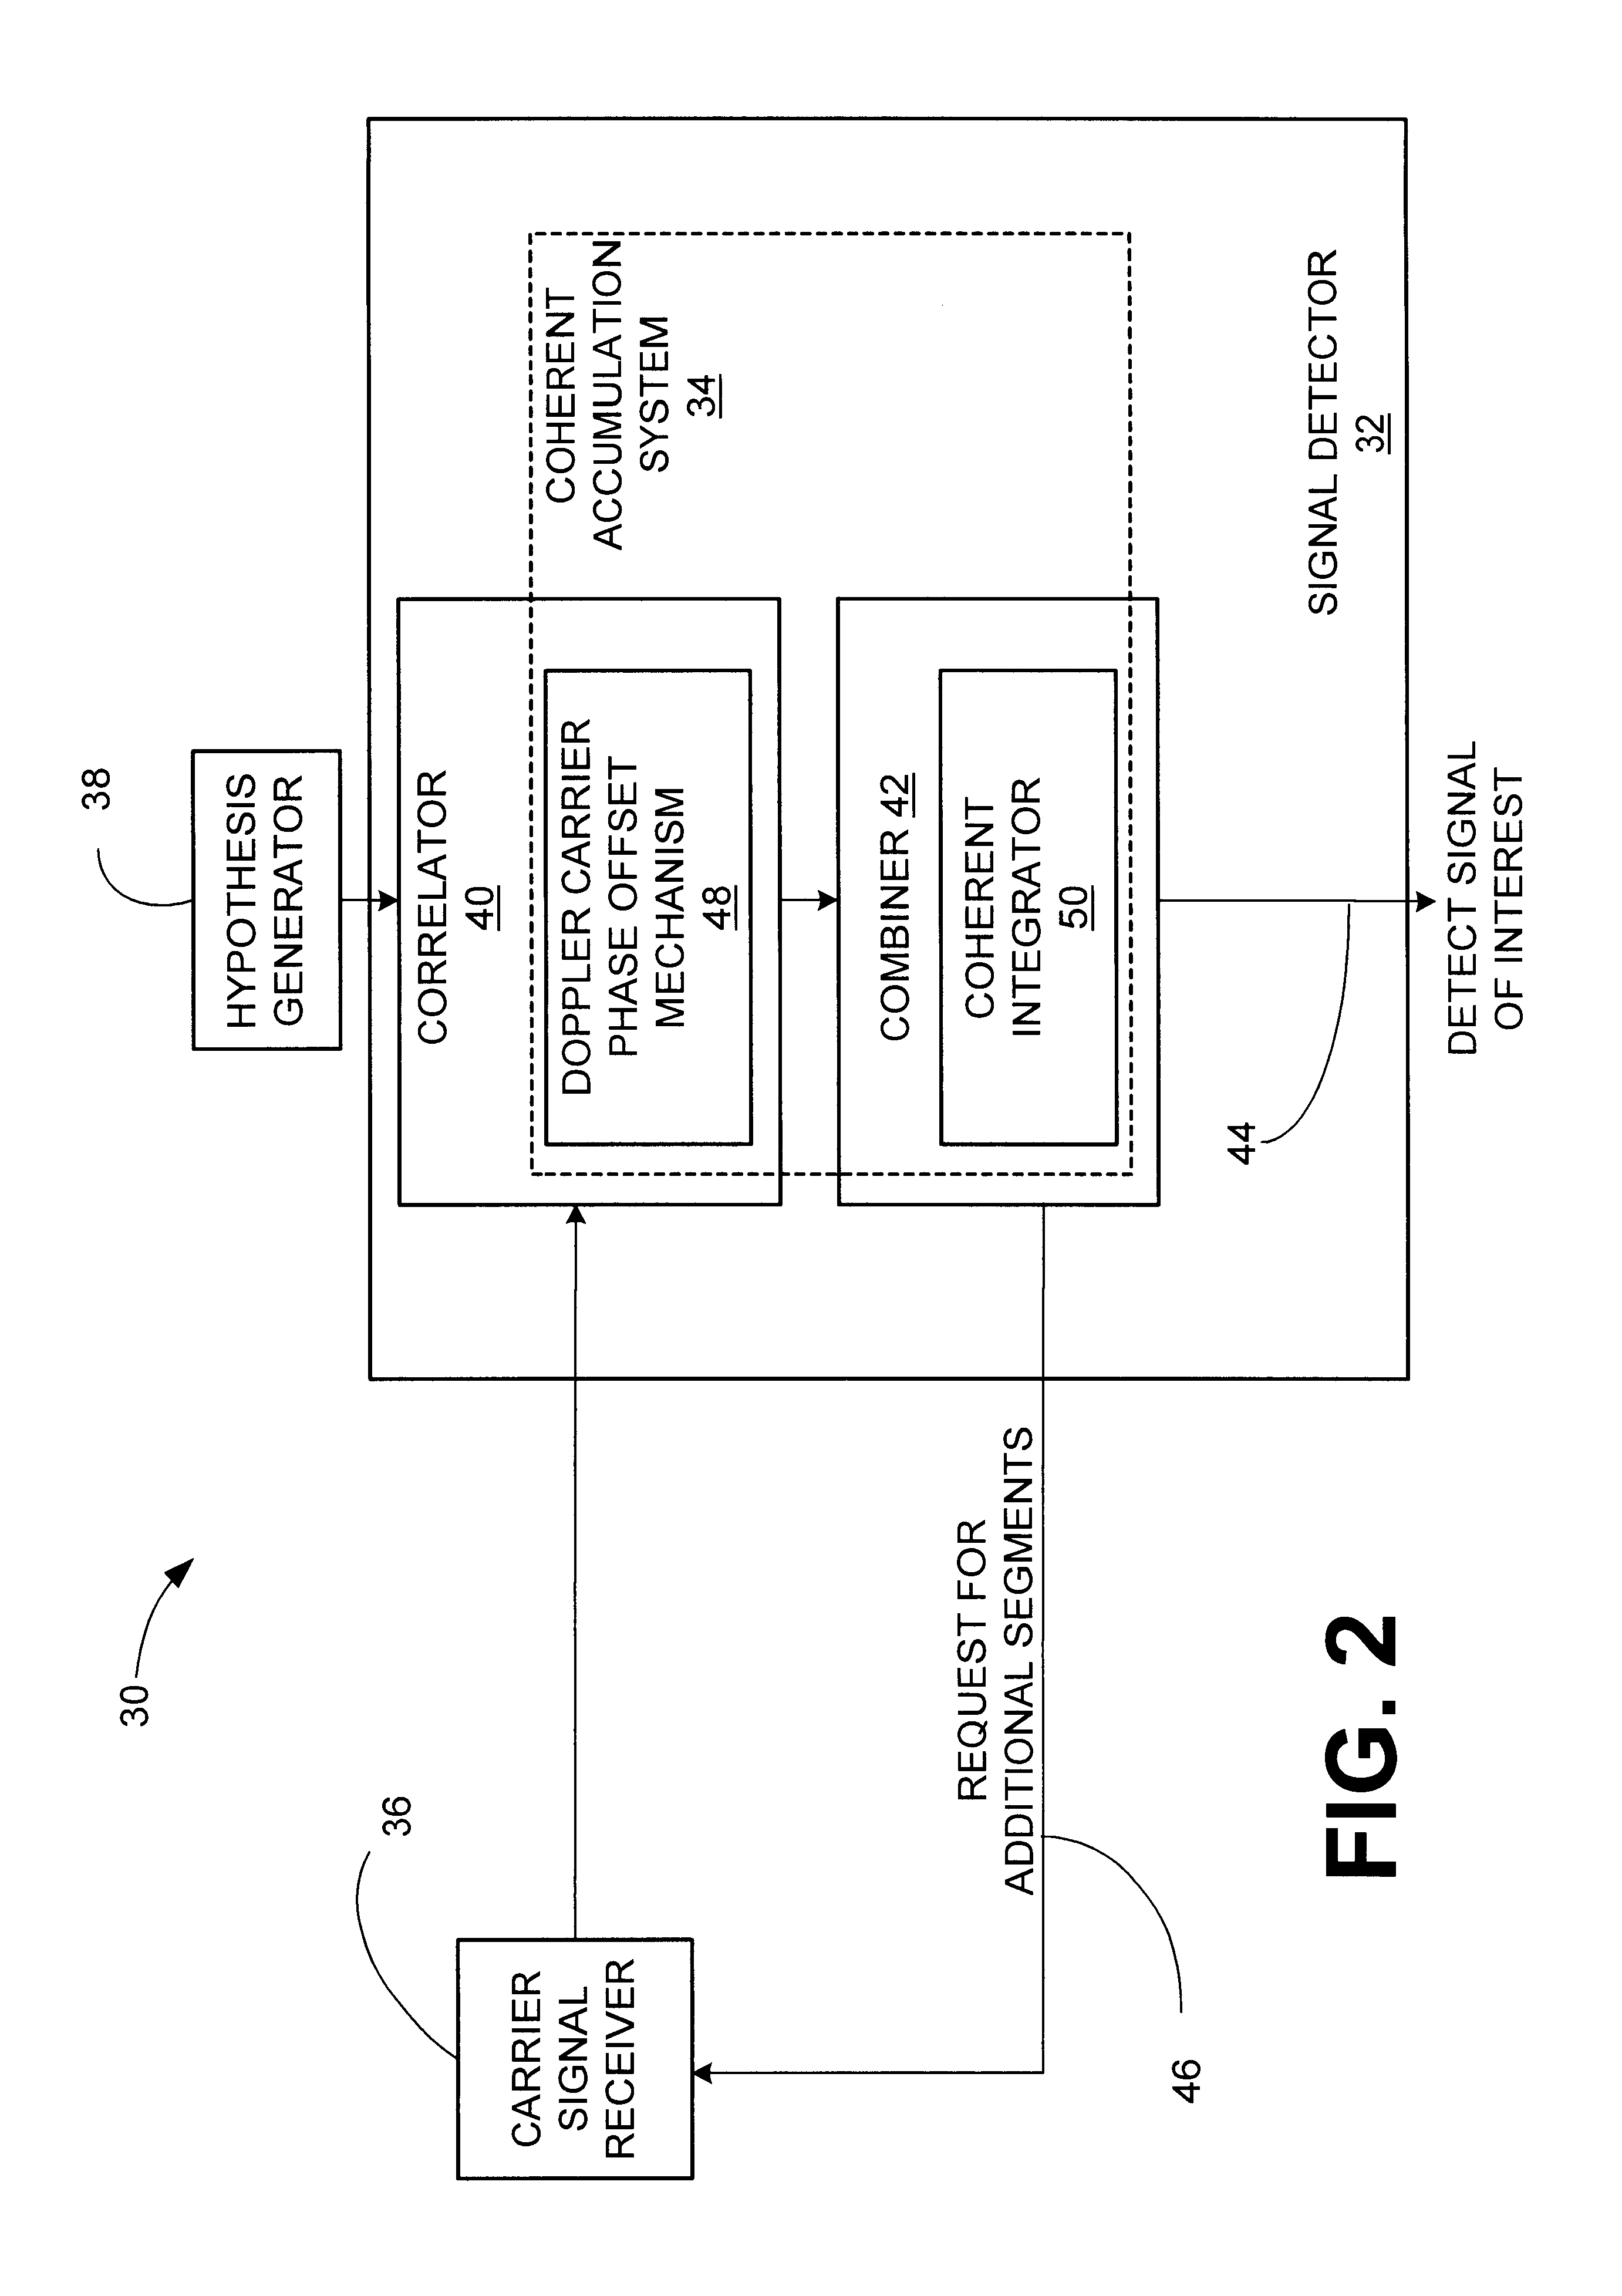 Signal detector and method employing a coherent accumulation system to correlate non-uniform and disjoint sample segments